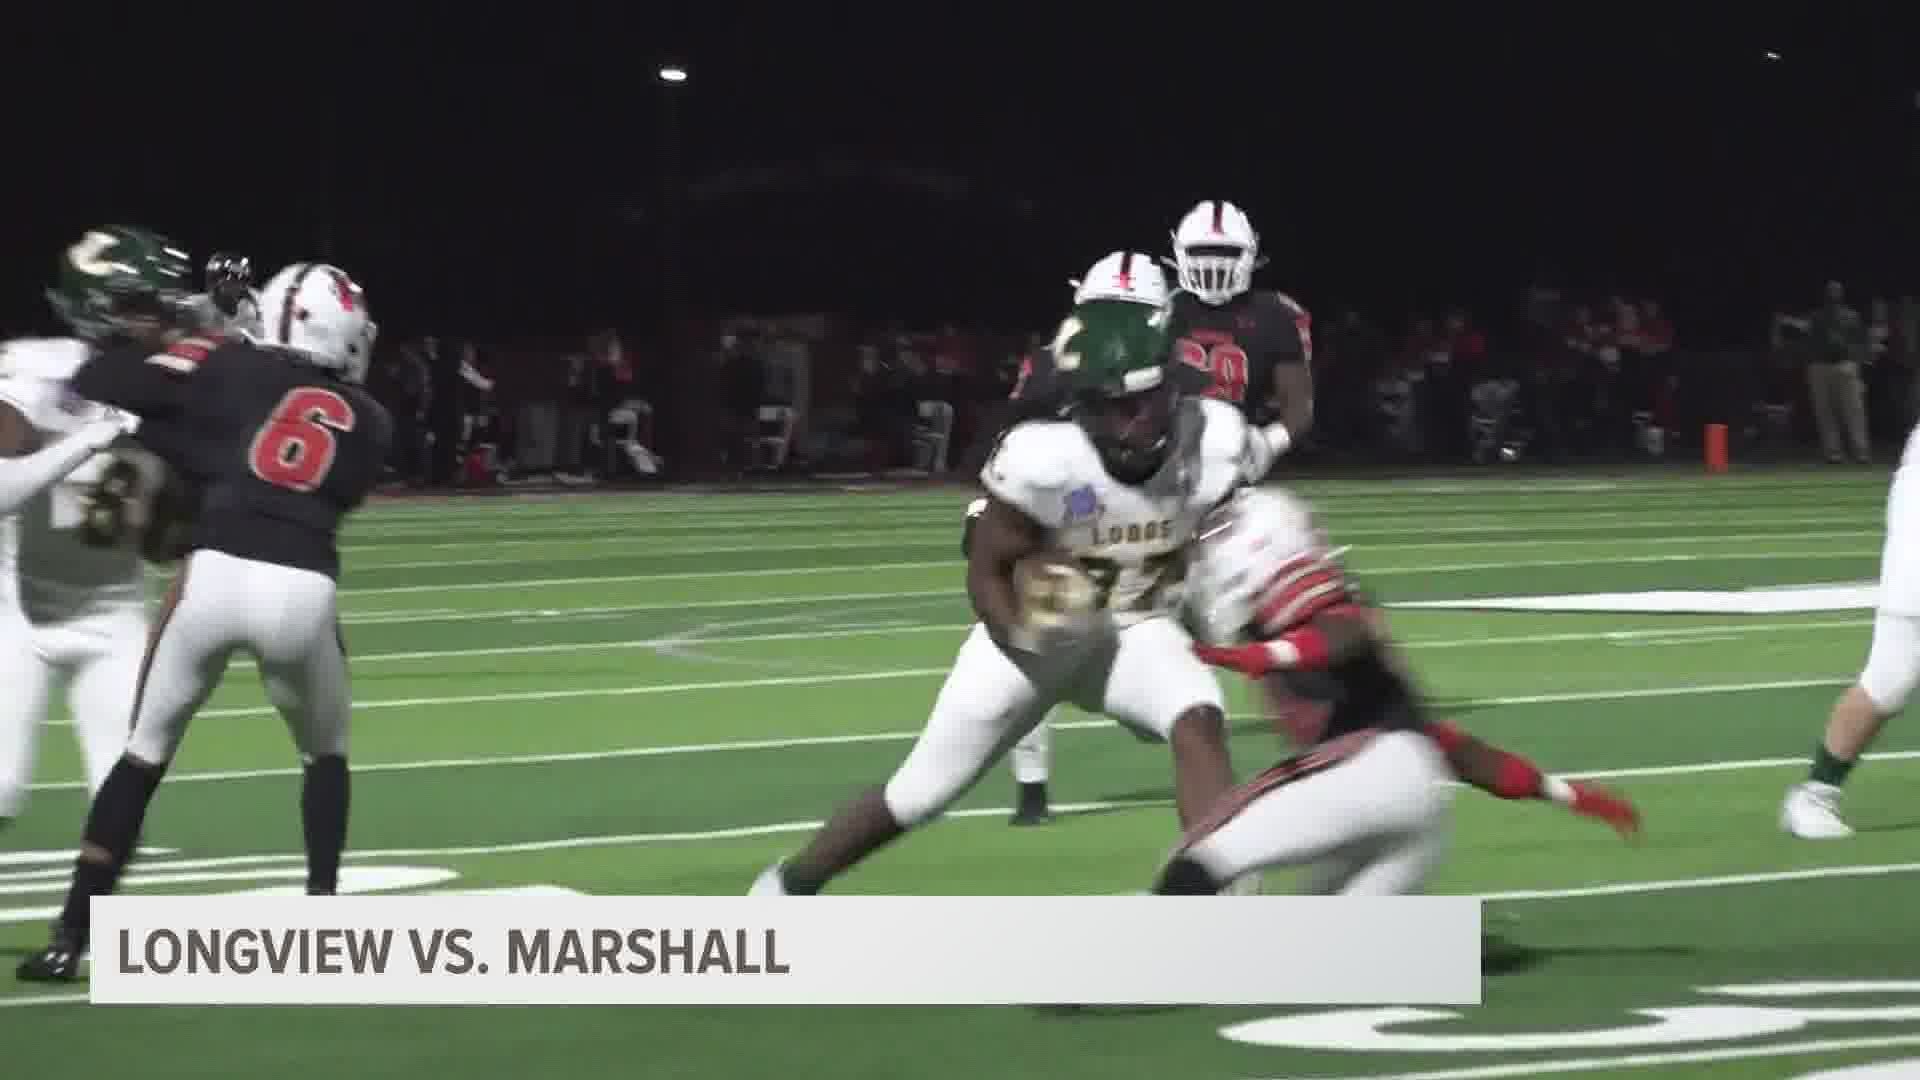 Longview defeated Marshall by a score of 53-21.